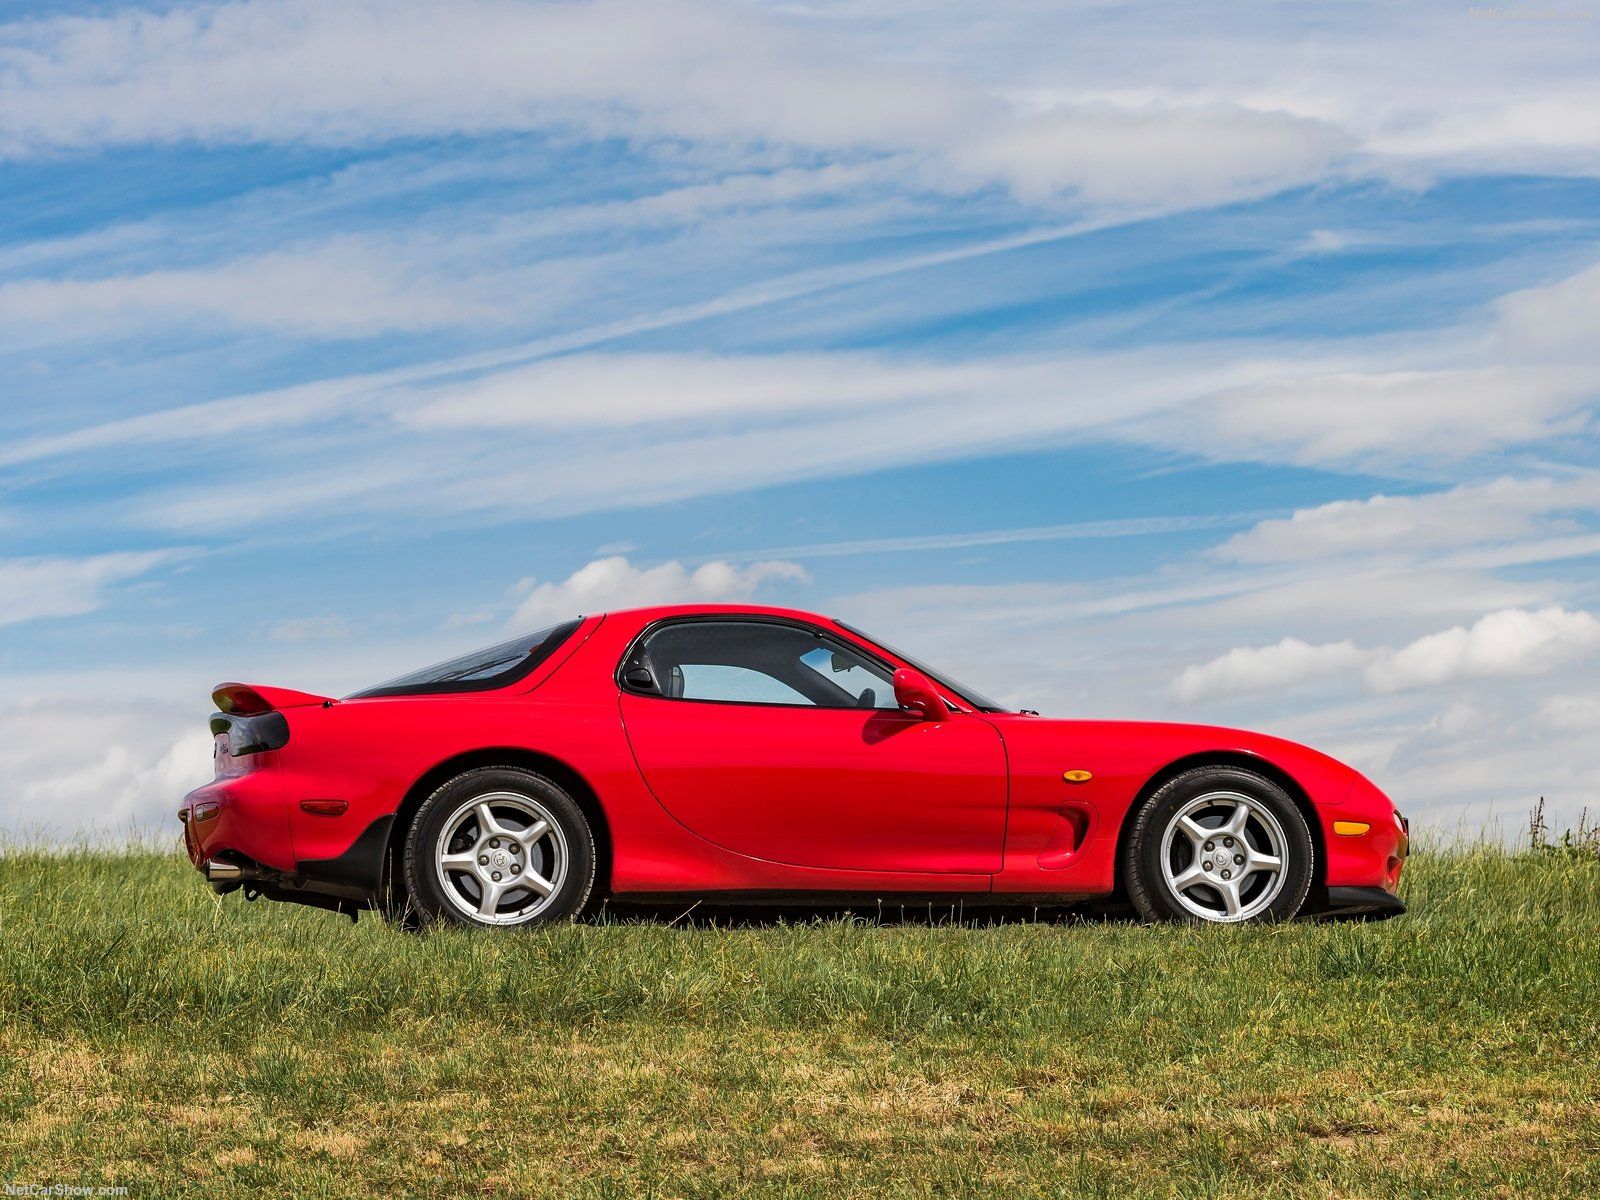 Mazda RX-7 FD, red, side profile view on grass